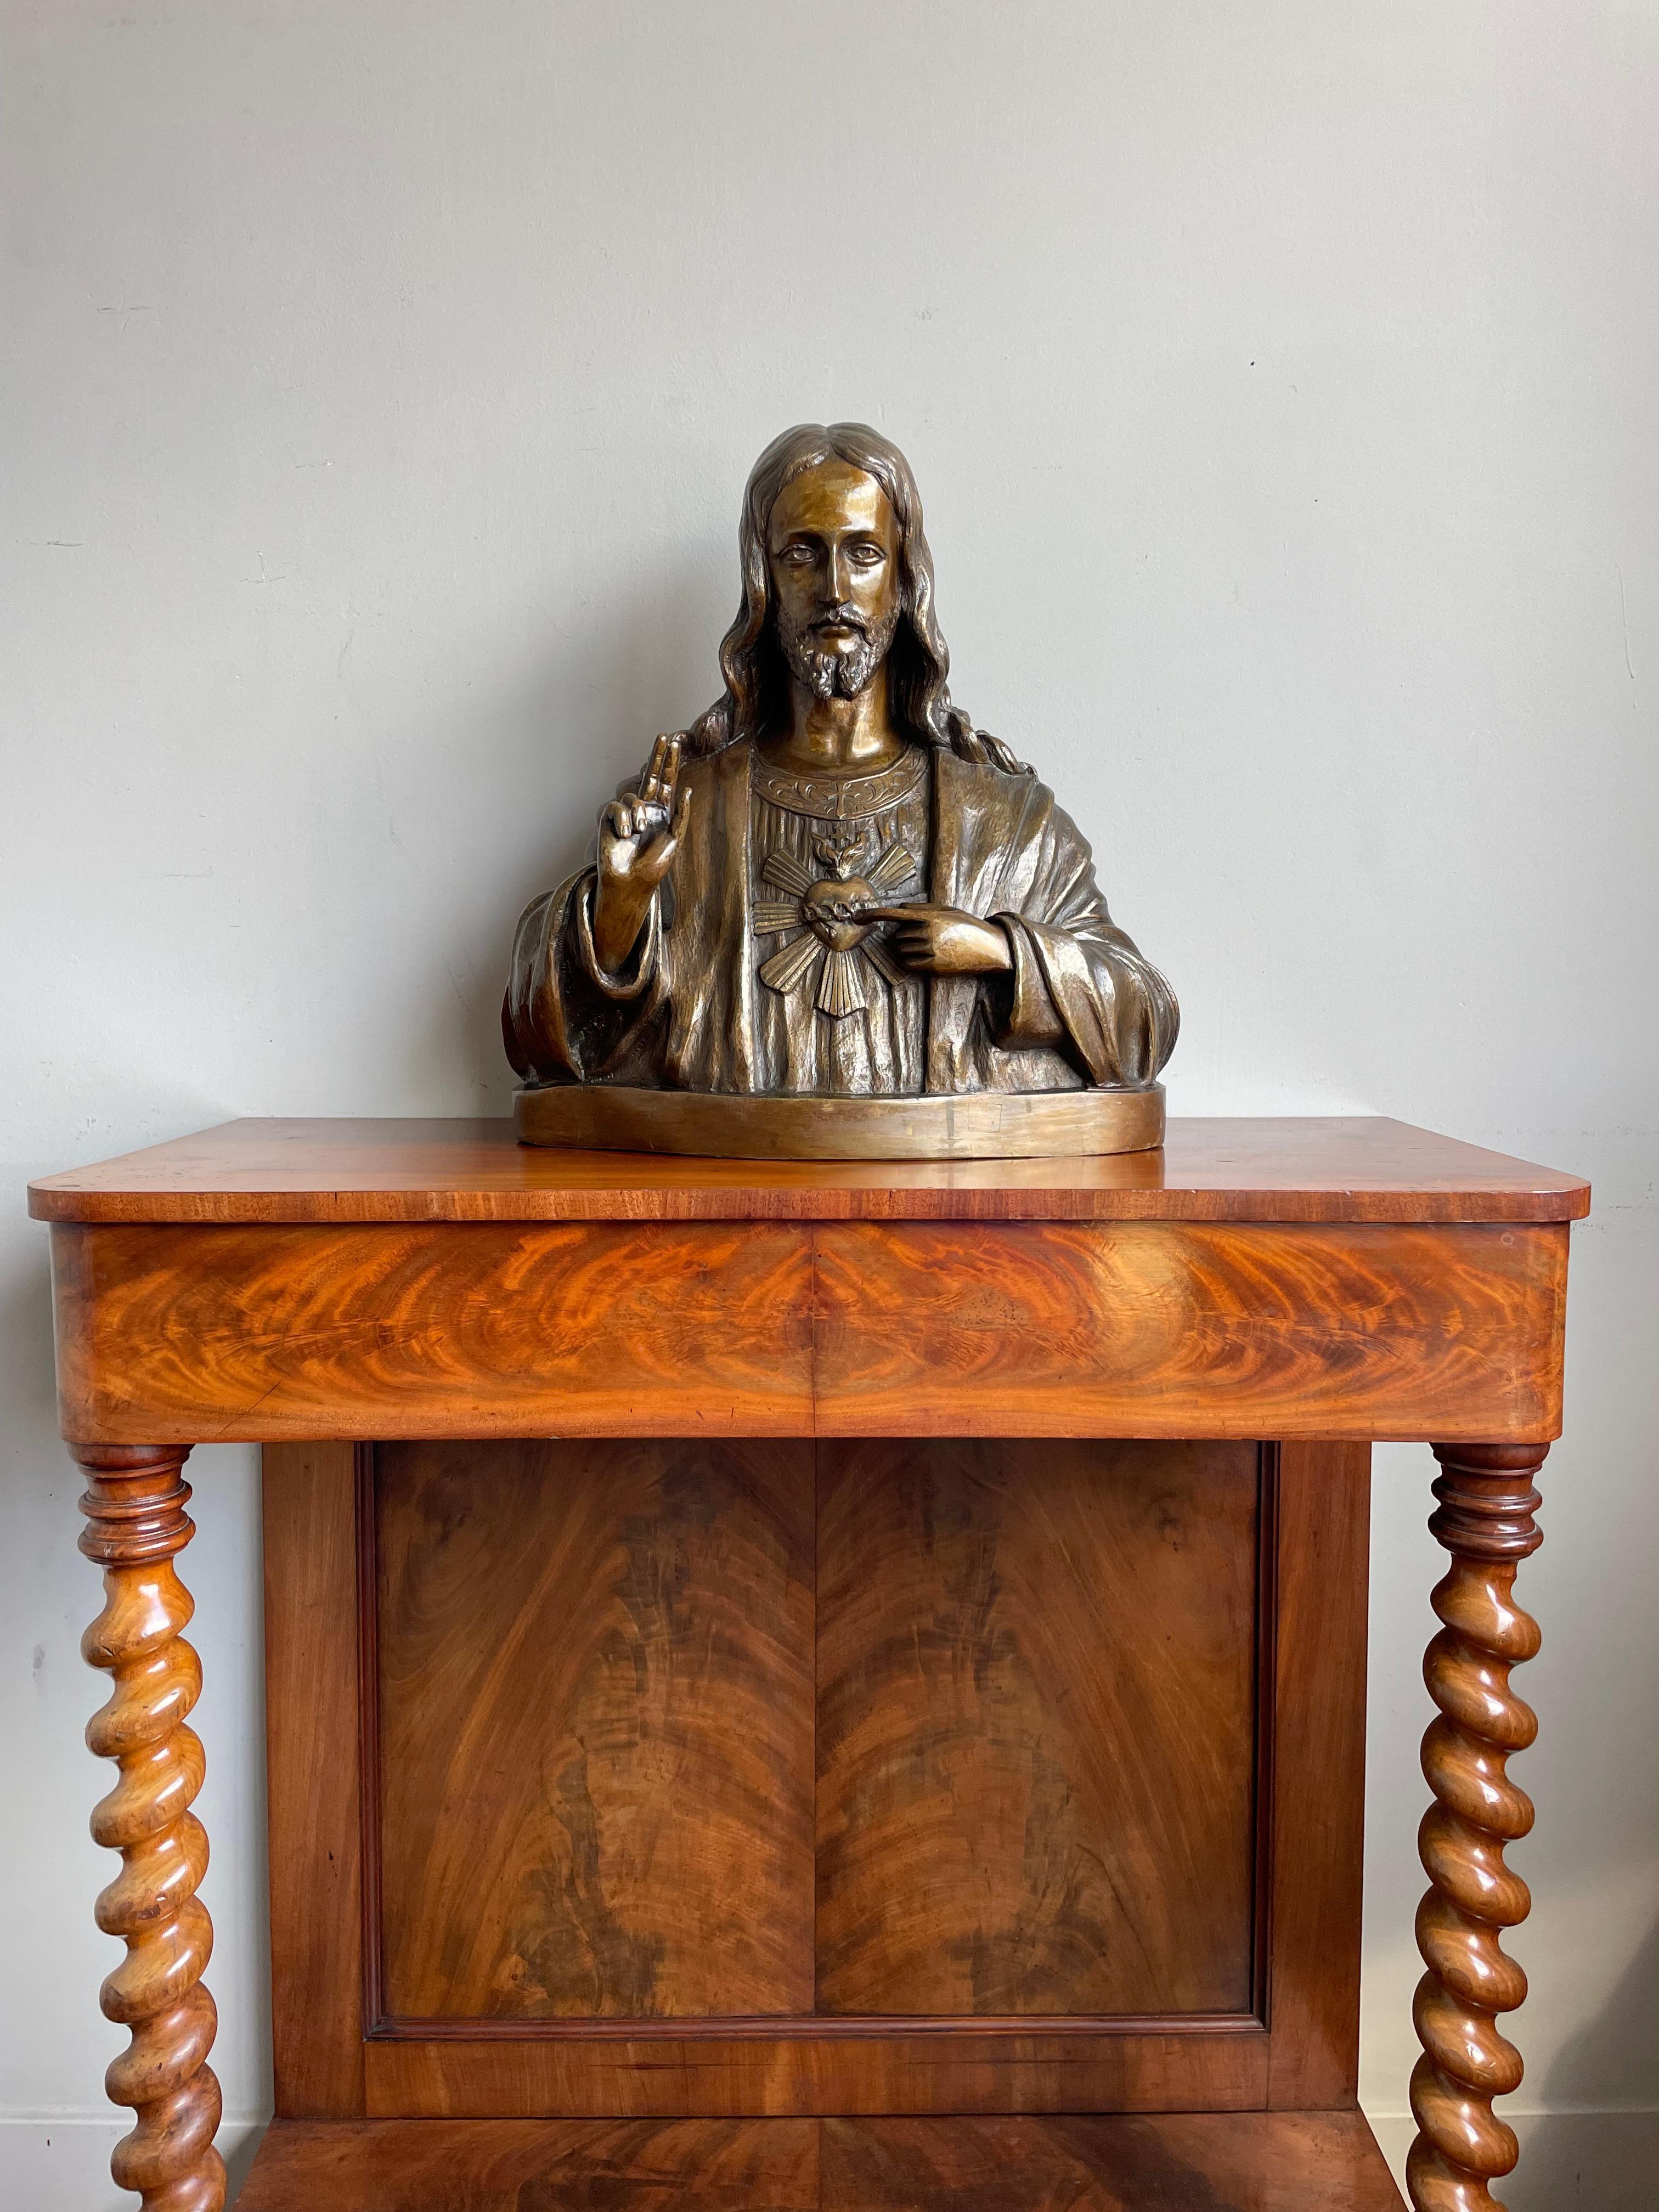 Rare and large antique bronze sculpture of our Lord Jesus.

This gorgeous and sizeable bronze sculpture is another one of our recent great finds. We have never seen a bronze holy heart sculpture of this large size and with these beautiful details.